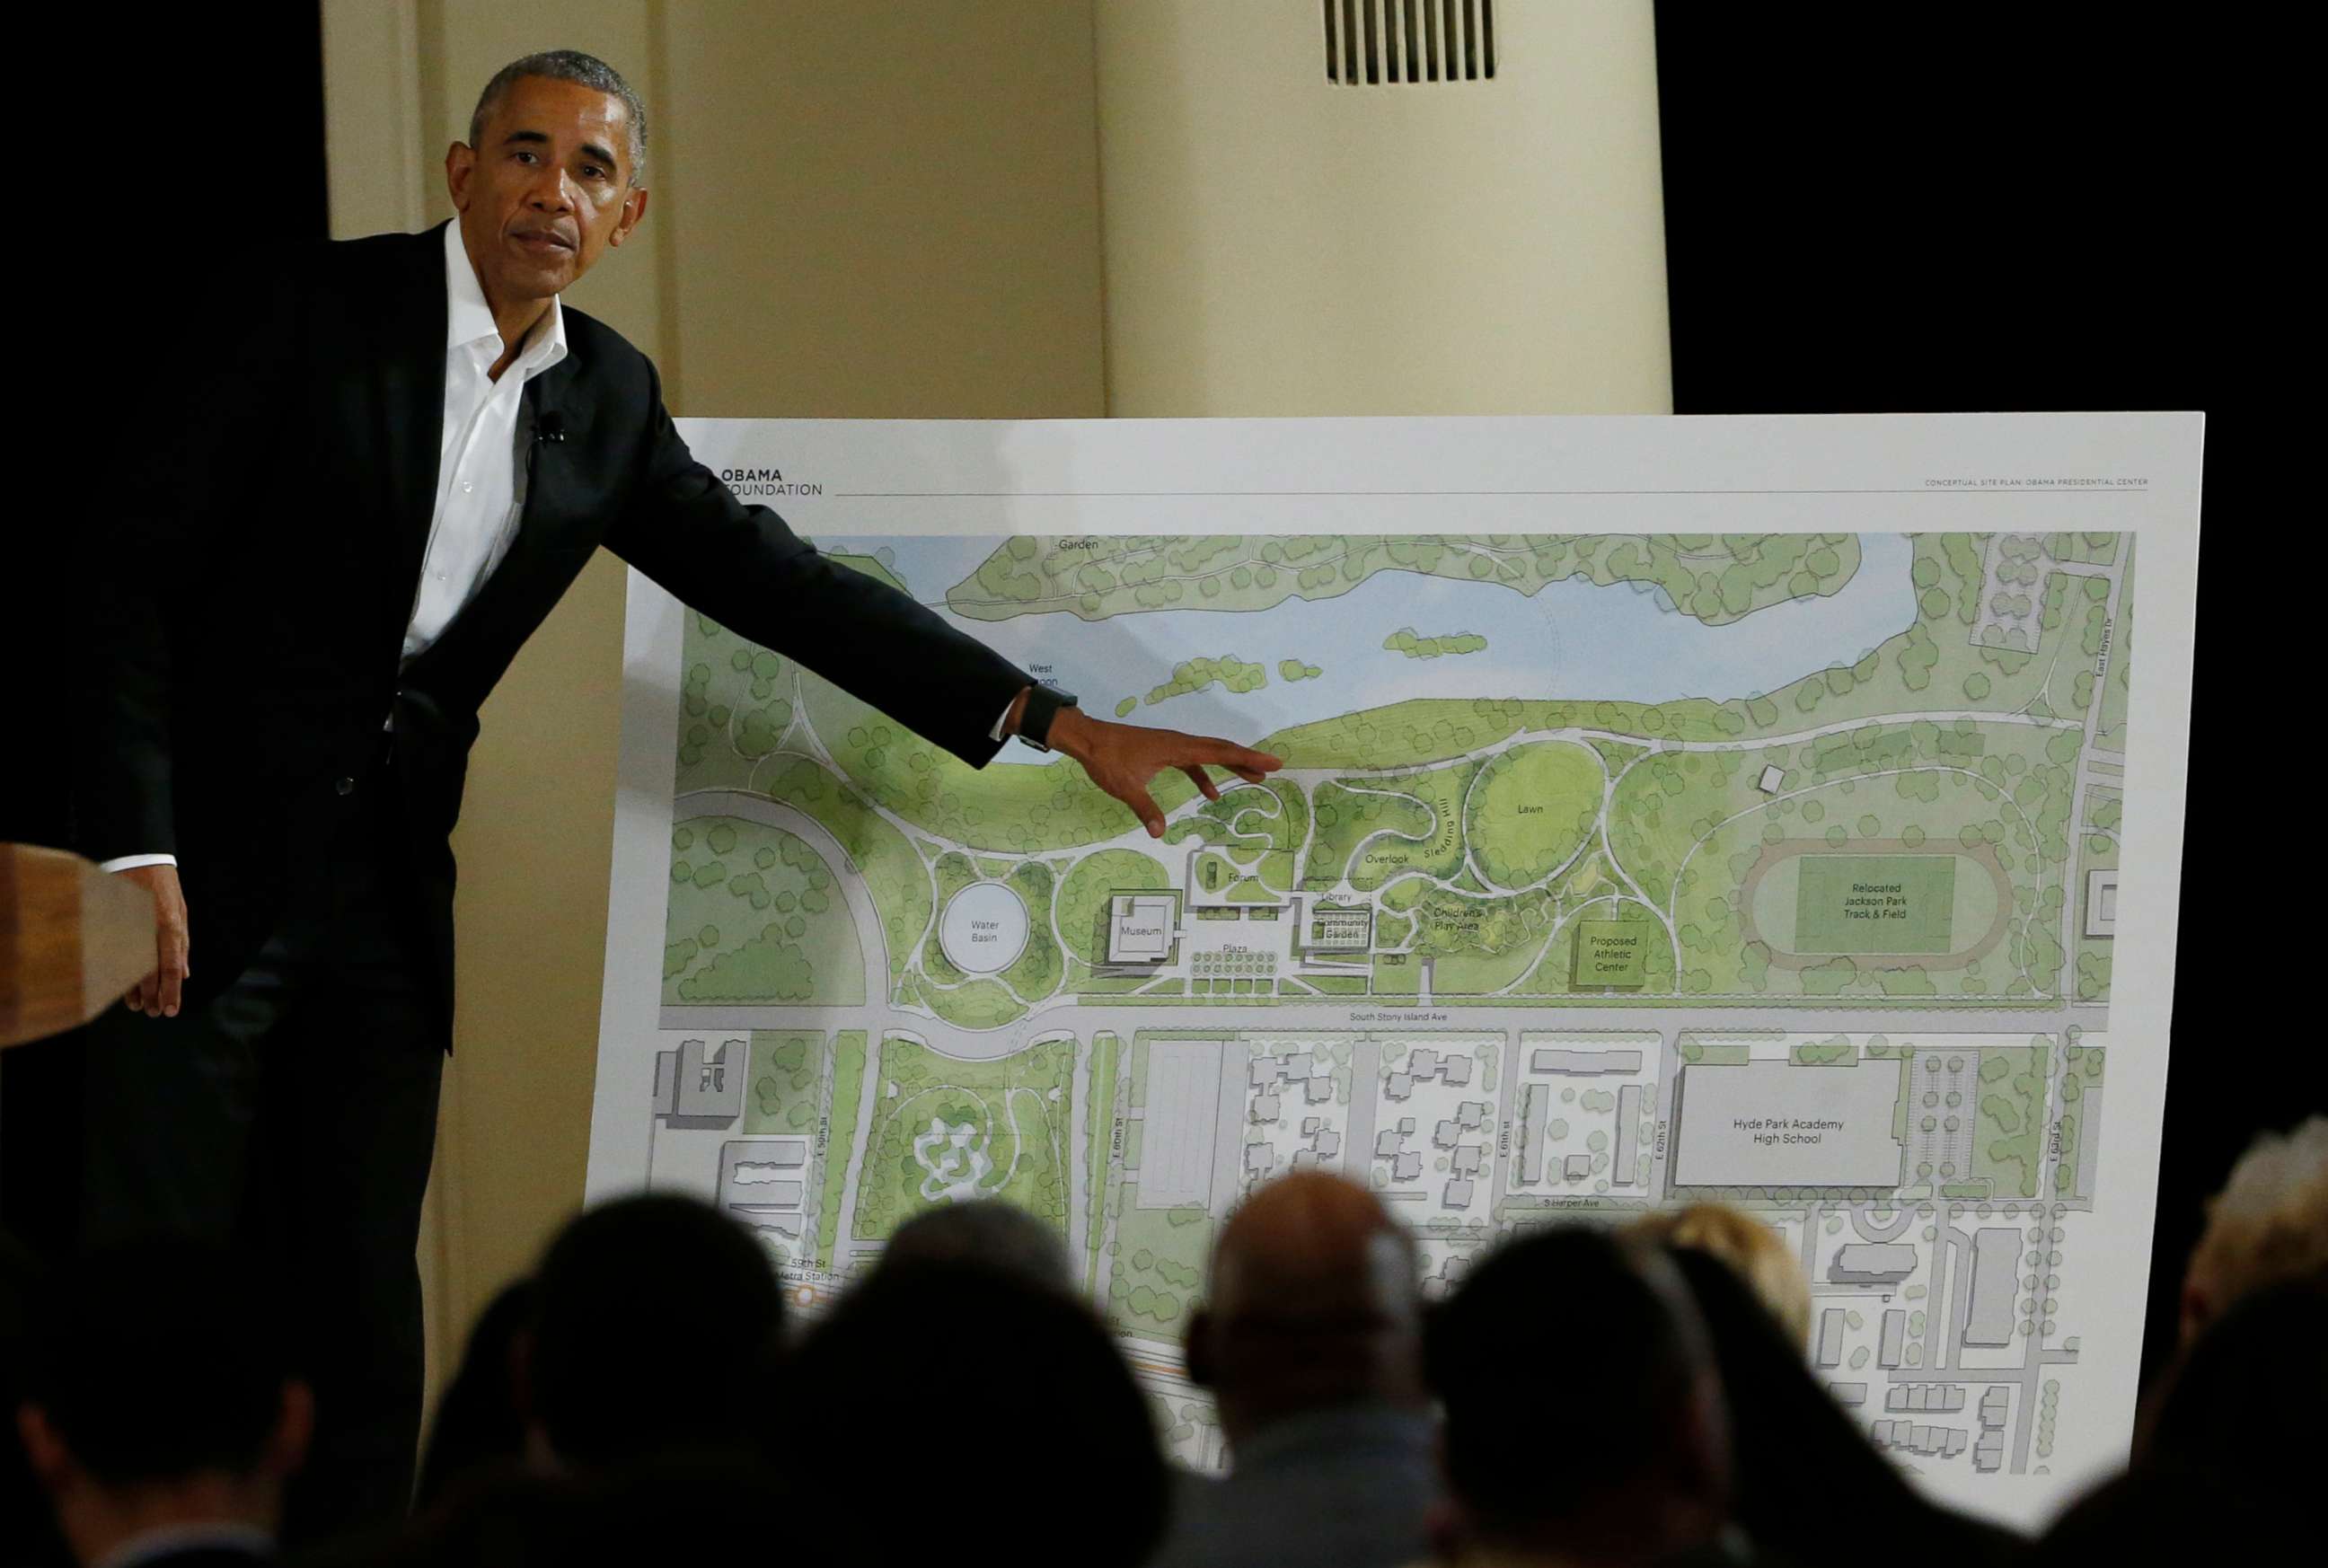 PHOTO: In this May 3, 2017, file photo, former President Barack Obama speaks near a rendering for the former president's lakefront presidential center at a community event on the Presidential Center at the South Shore Cultural Center in Chicago.